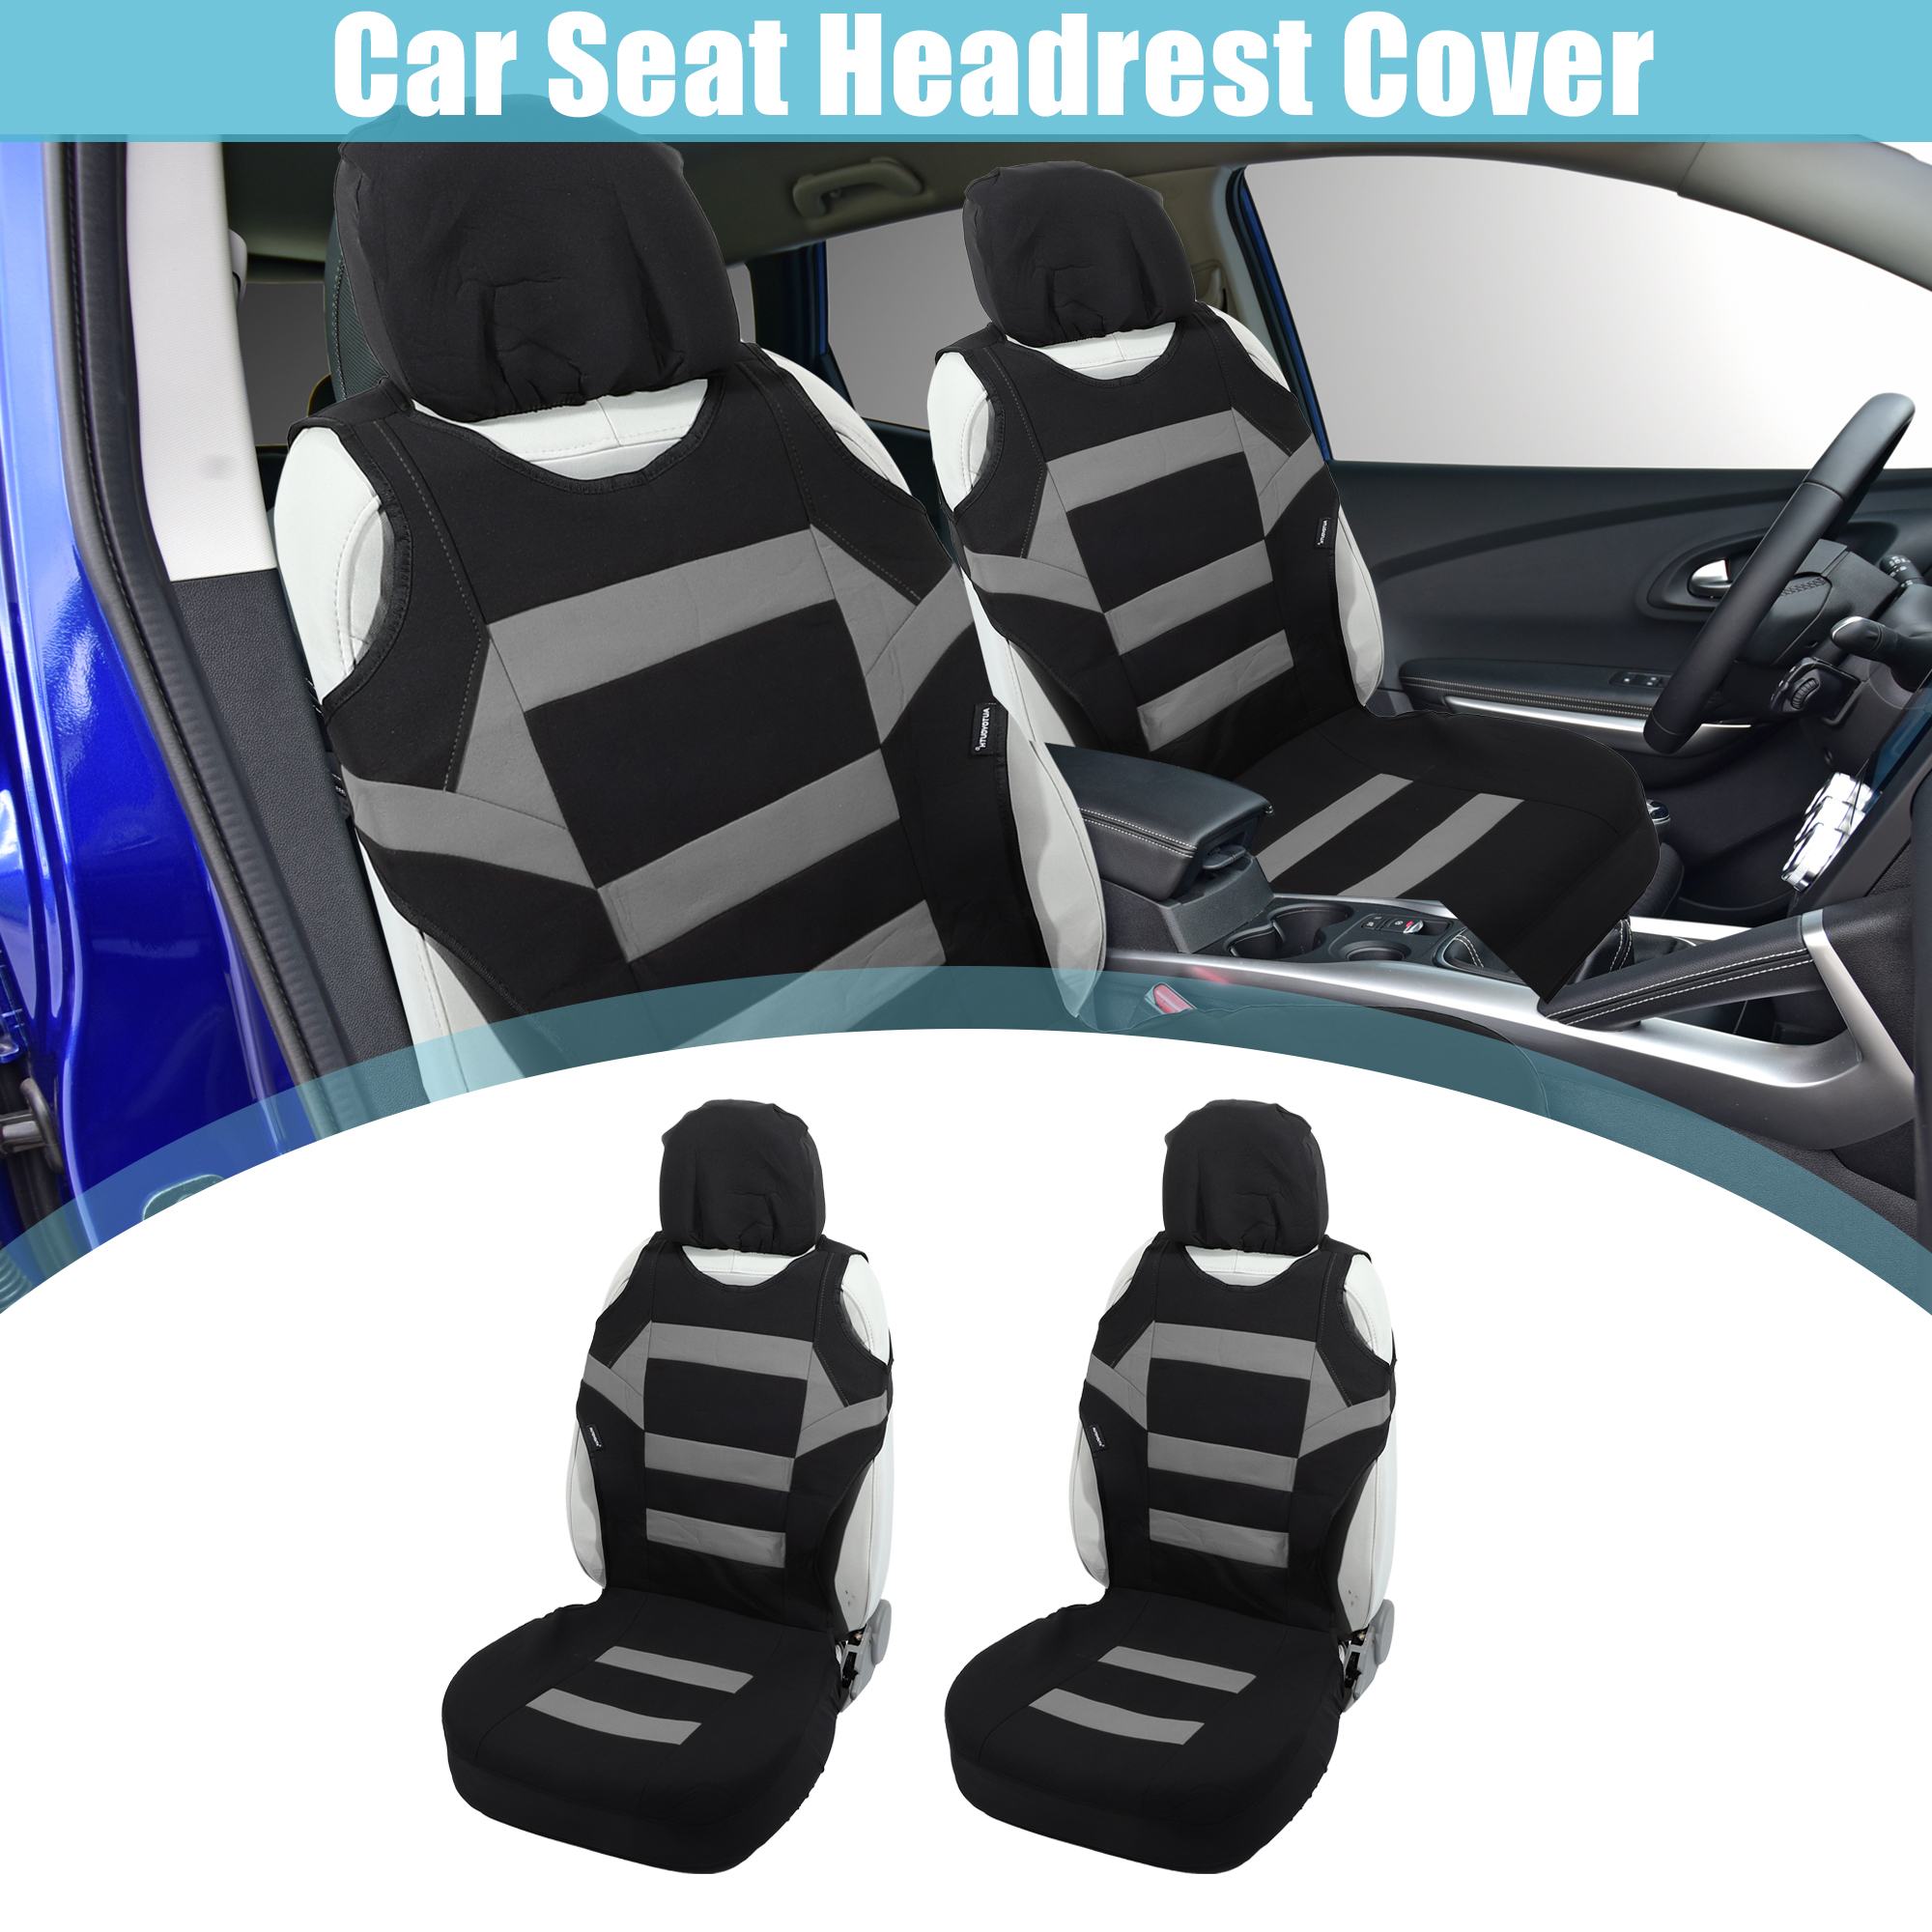 Unique Bargains Front Car Seat Cover Universal Seat Protectors Seat Cushion Cover Gray - Pack of 2